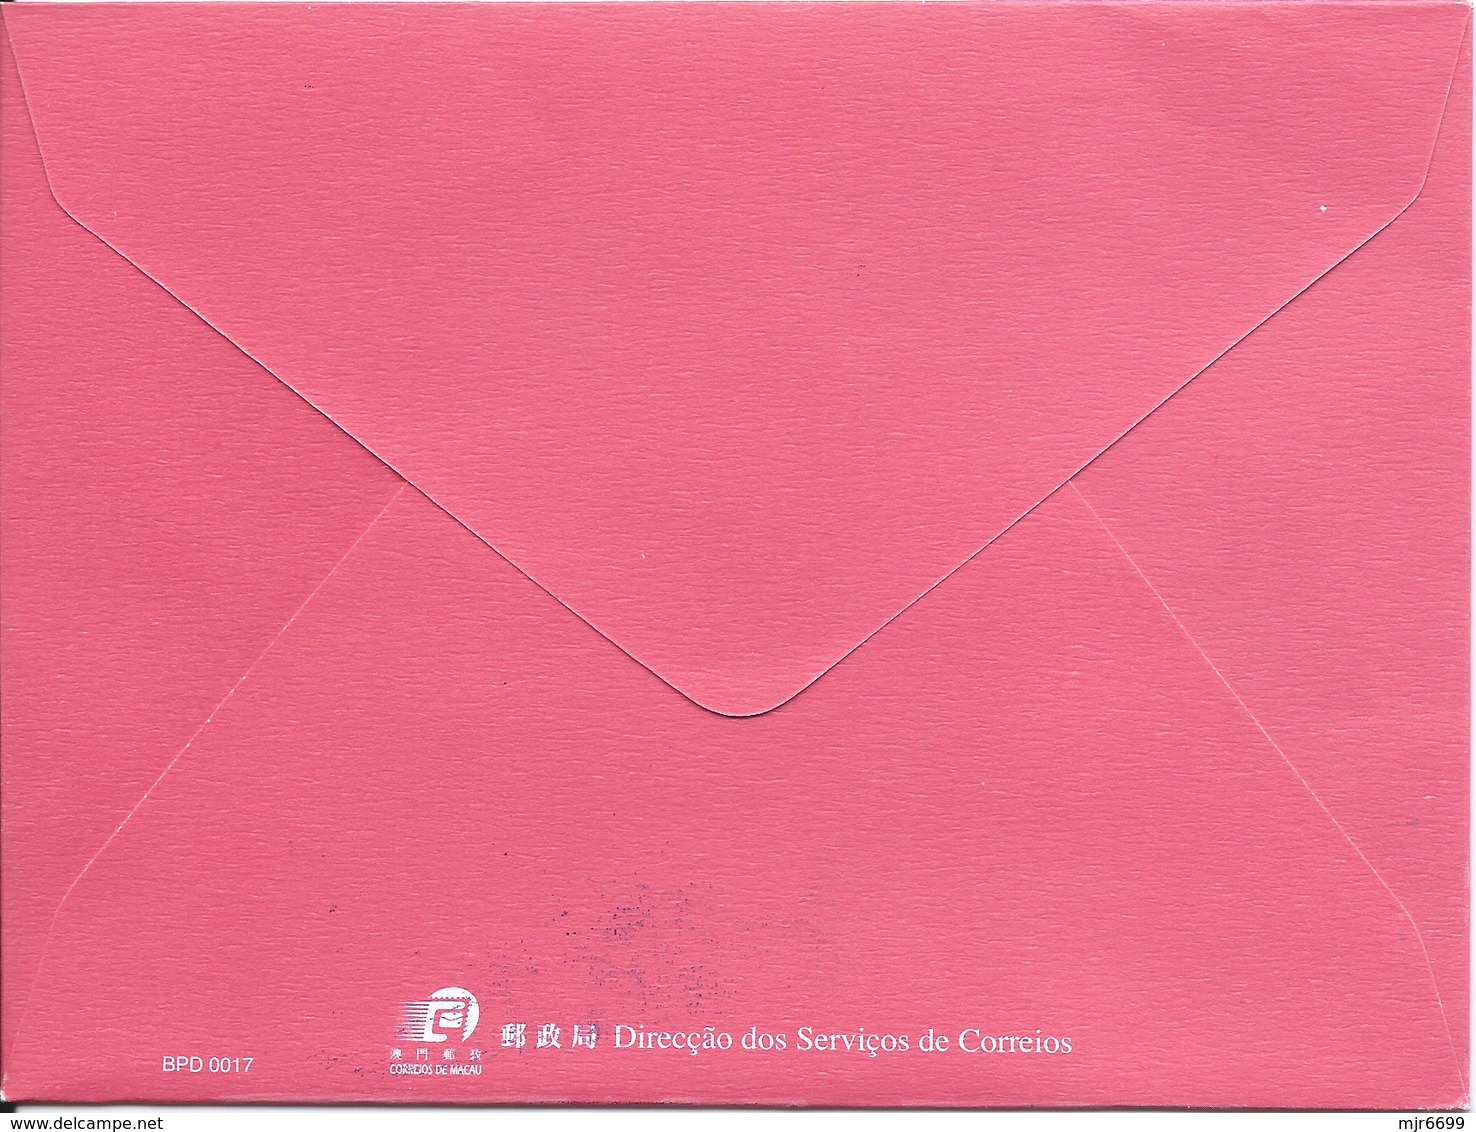 MACAU 2007 LUNAR YEAR OF THE PIG GREETING CARD & POSTAGE PAID COVER FIRST DAY USAGE - Postal Stationery